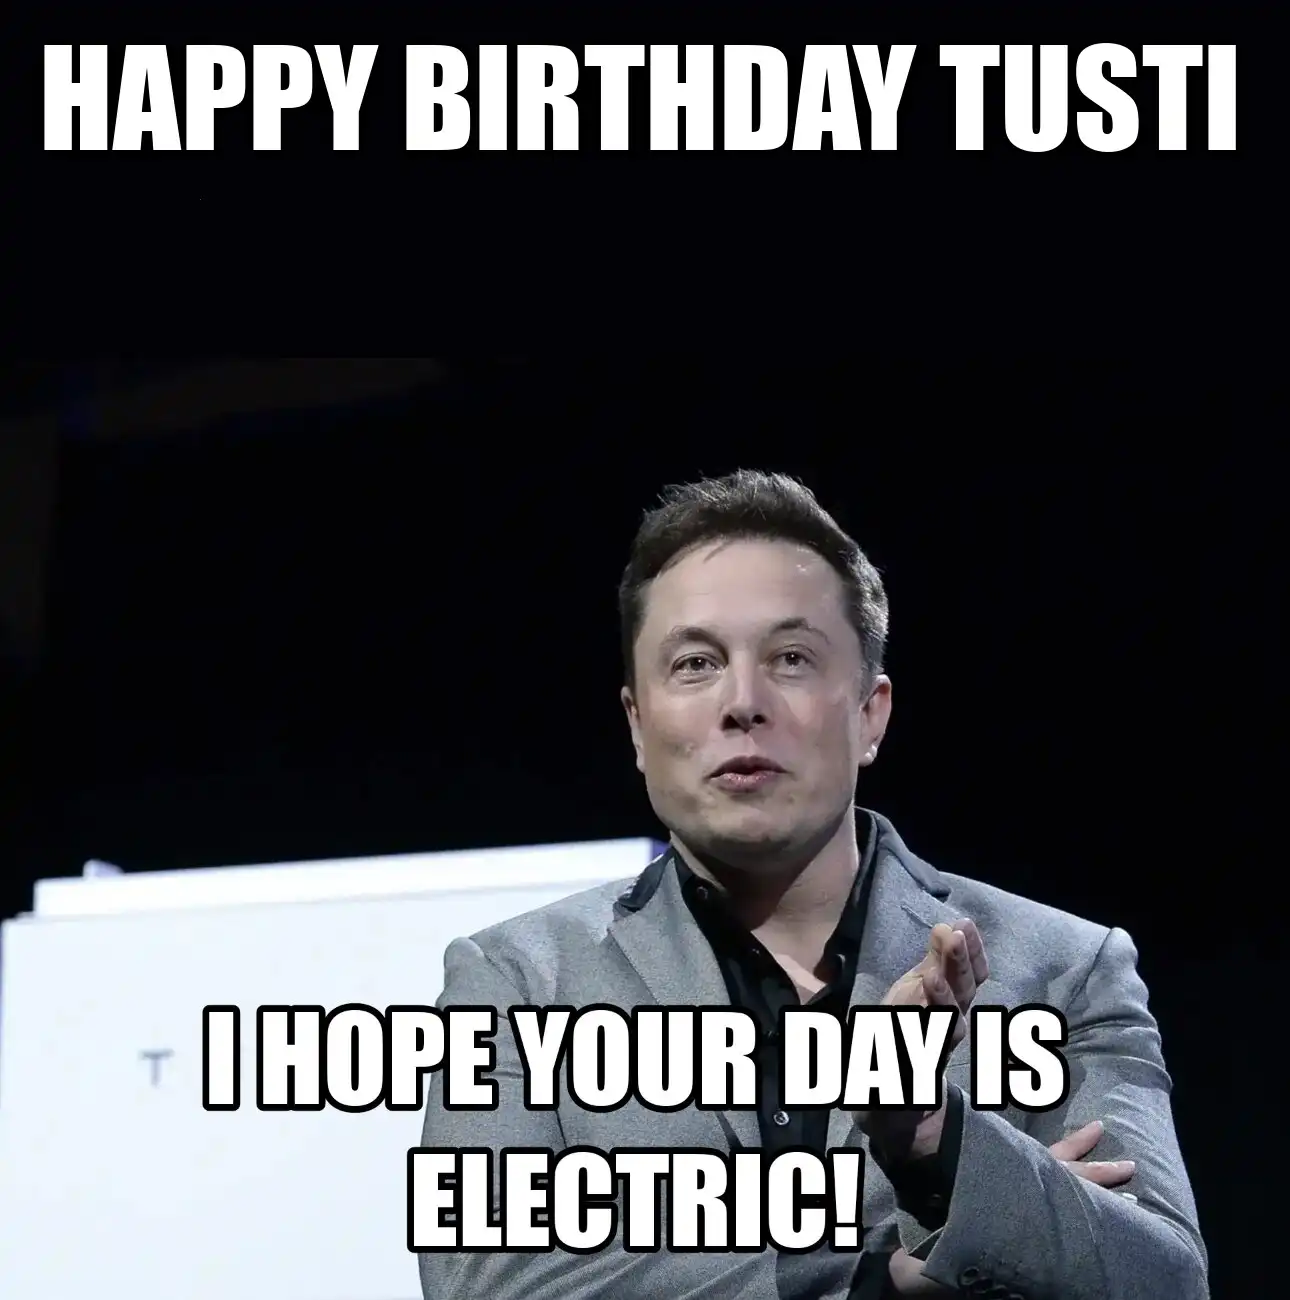 Happy Birthday Tusti I Hope Your Day Is Electric Meme